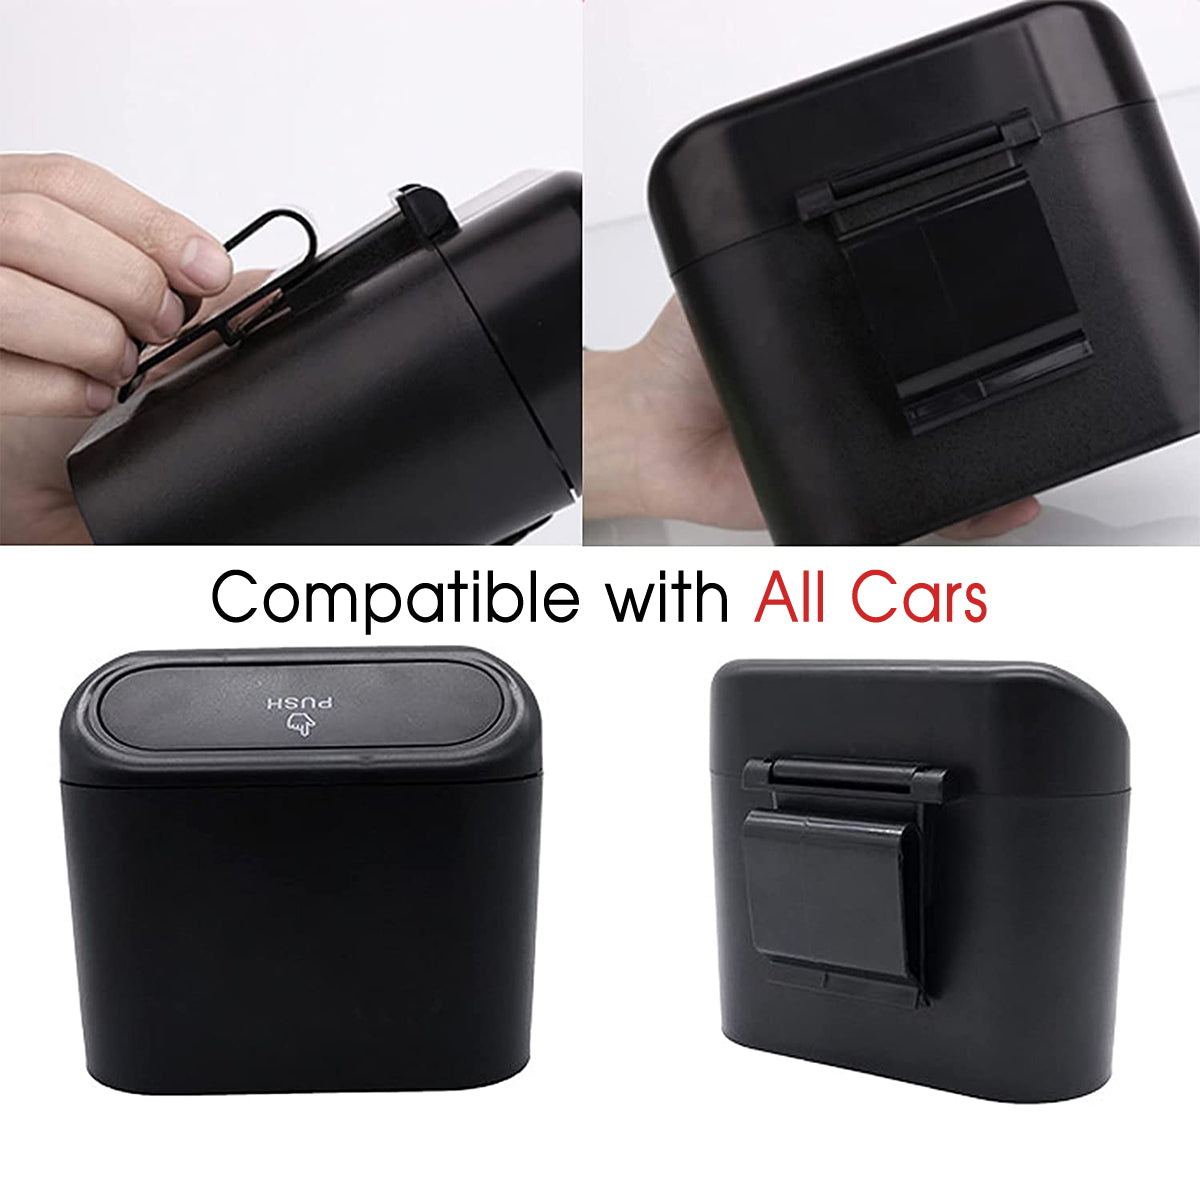 Car Trash Can, Custom For Your Cars, Mini Car Accessories with Lid and Trash Bag, Cute Car Organizer Bin, Small Garbage Can for Storage and Organization, Car Accessories TY11996